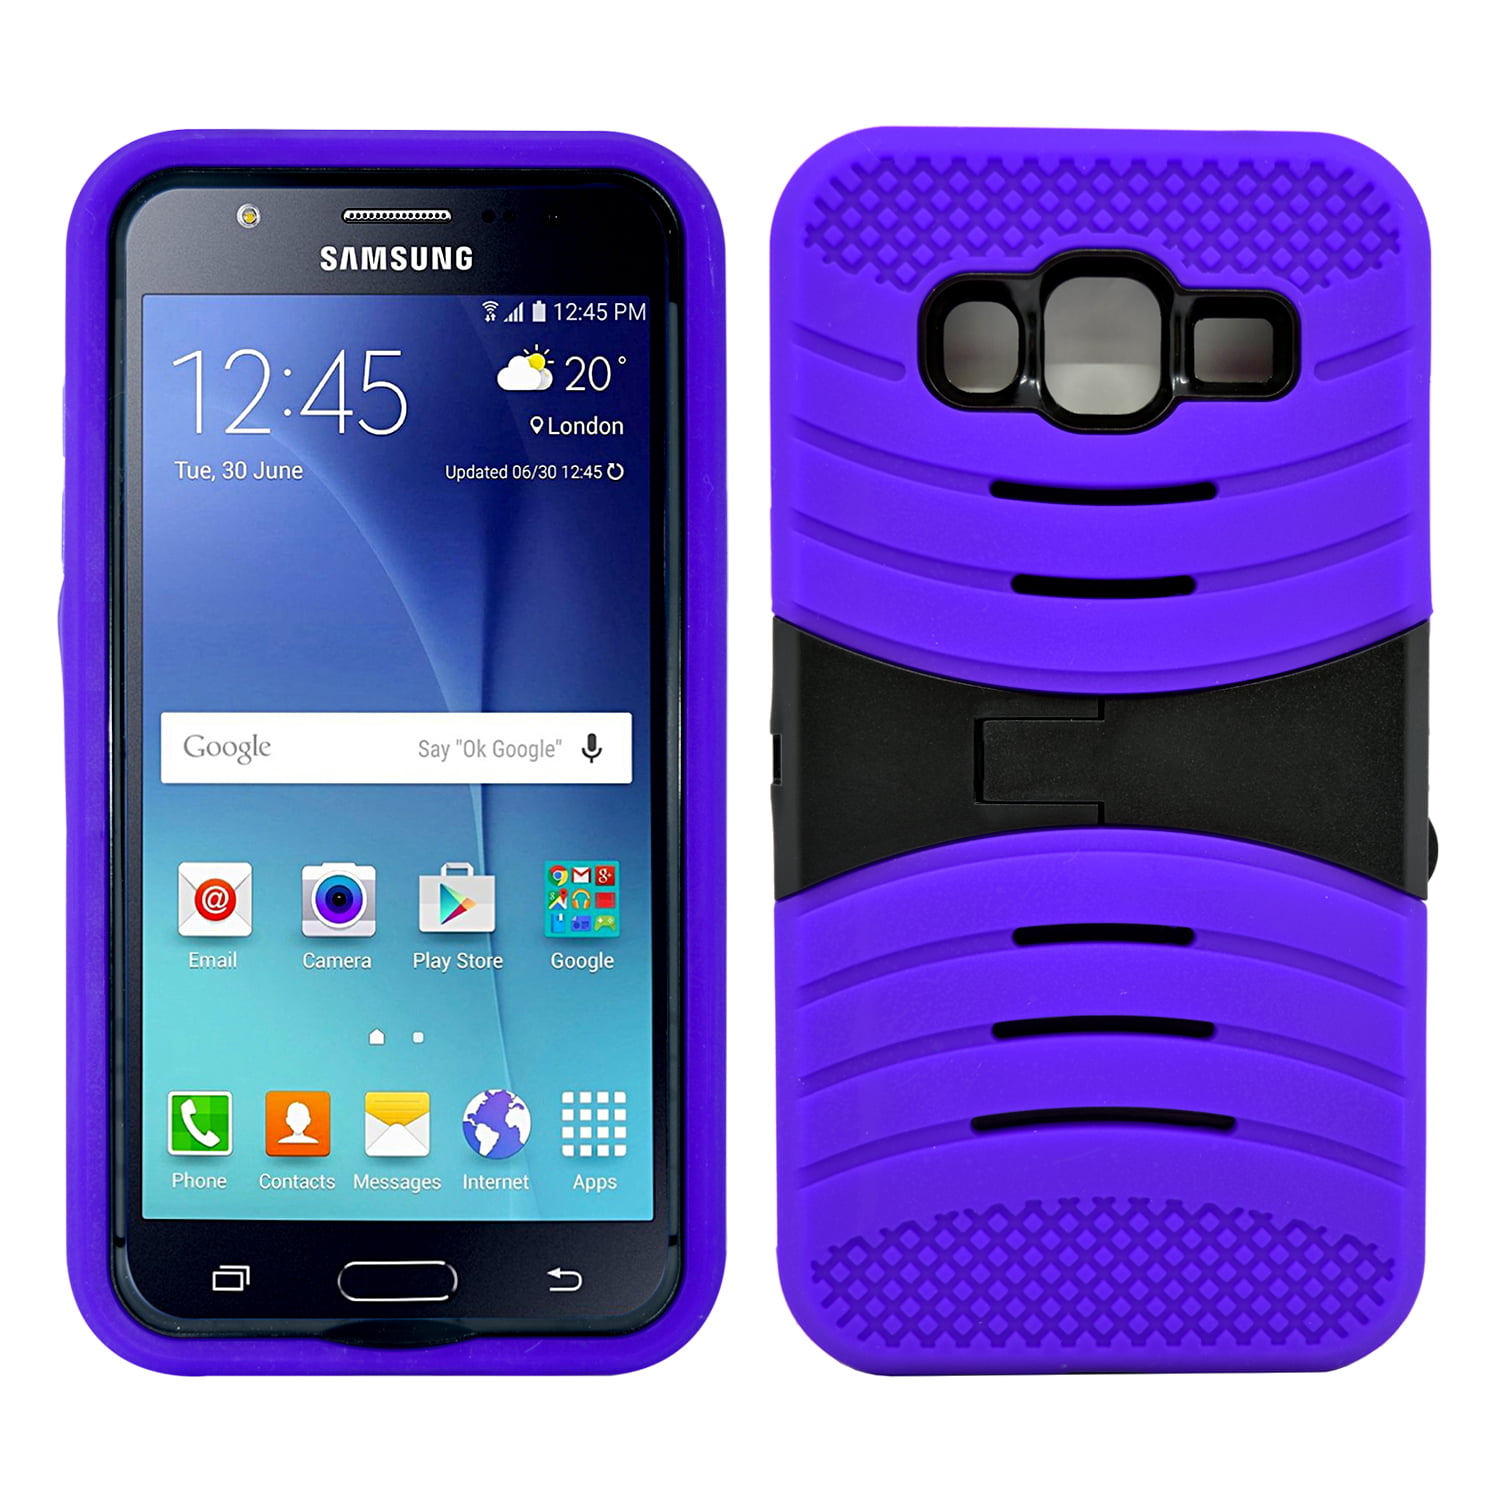 Uitbeelding Gang aardolie Modes Wireless Samsung Galaxy J5 Hybrid Silicone Case Cover Stand -  Walmart.com